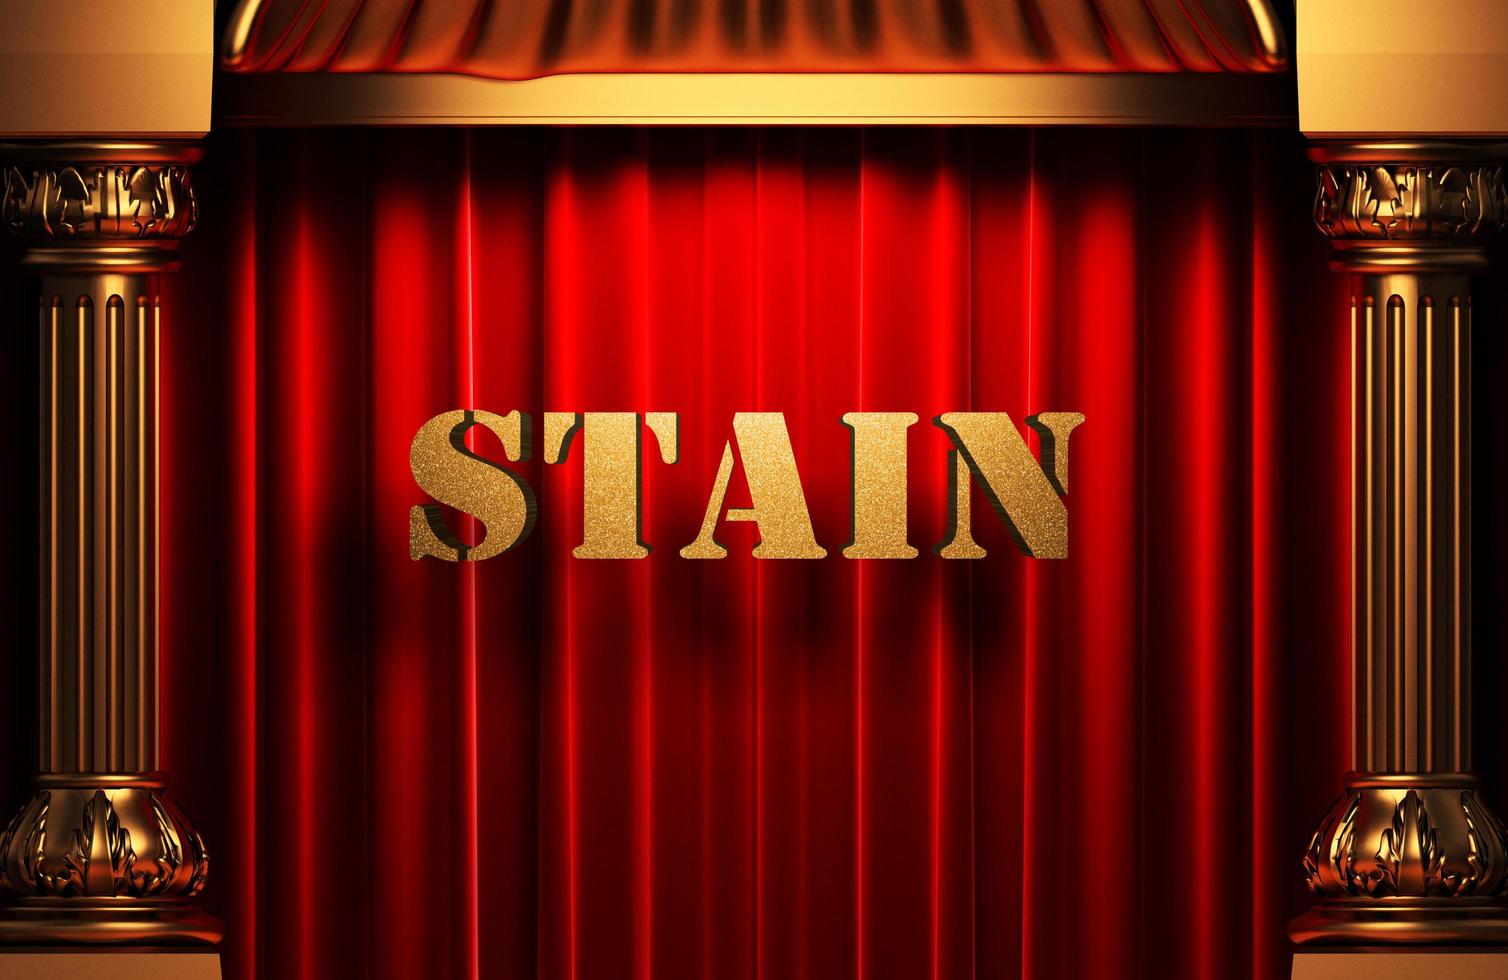 stain golden word on red curtain photo